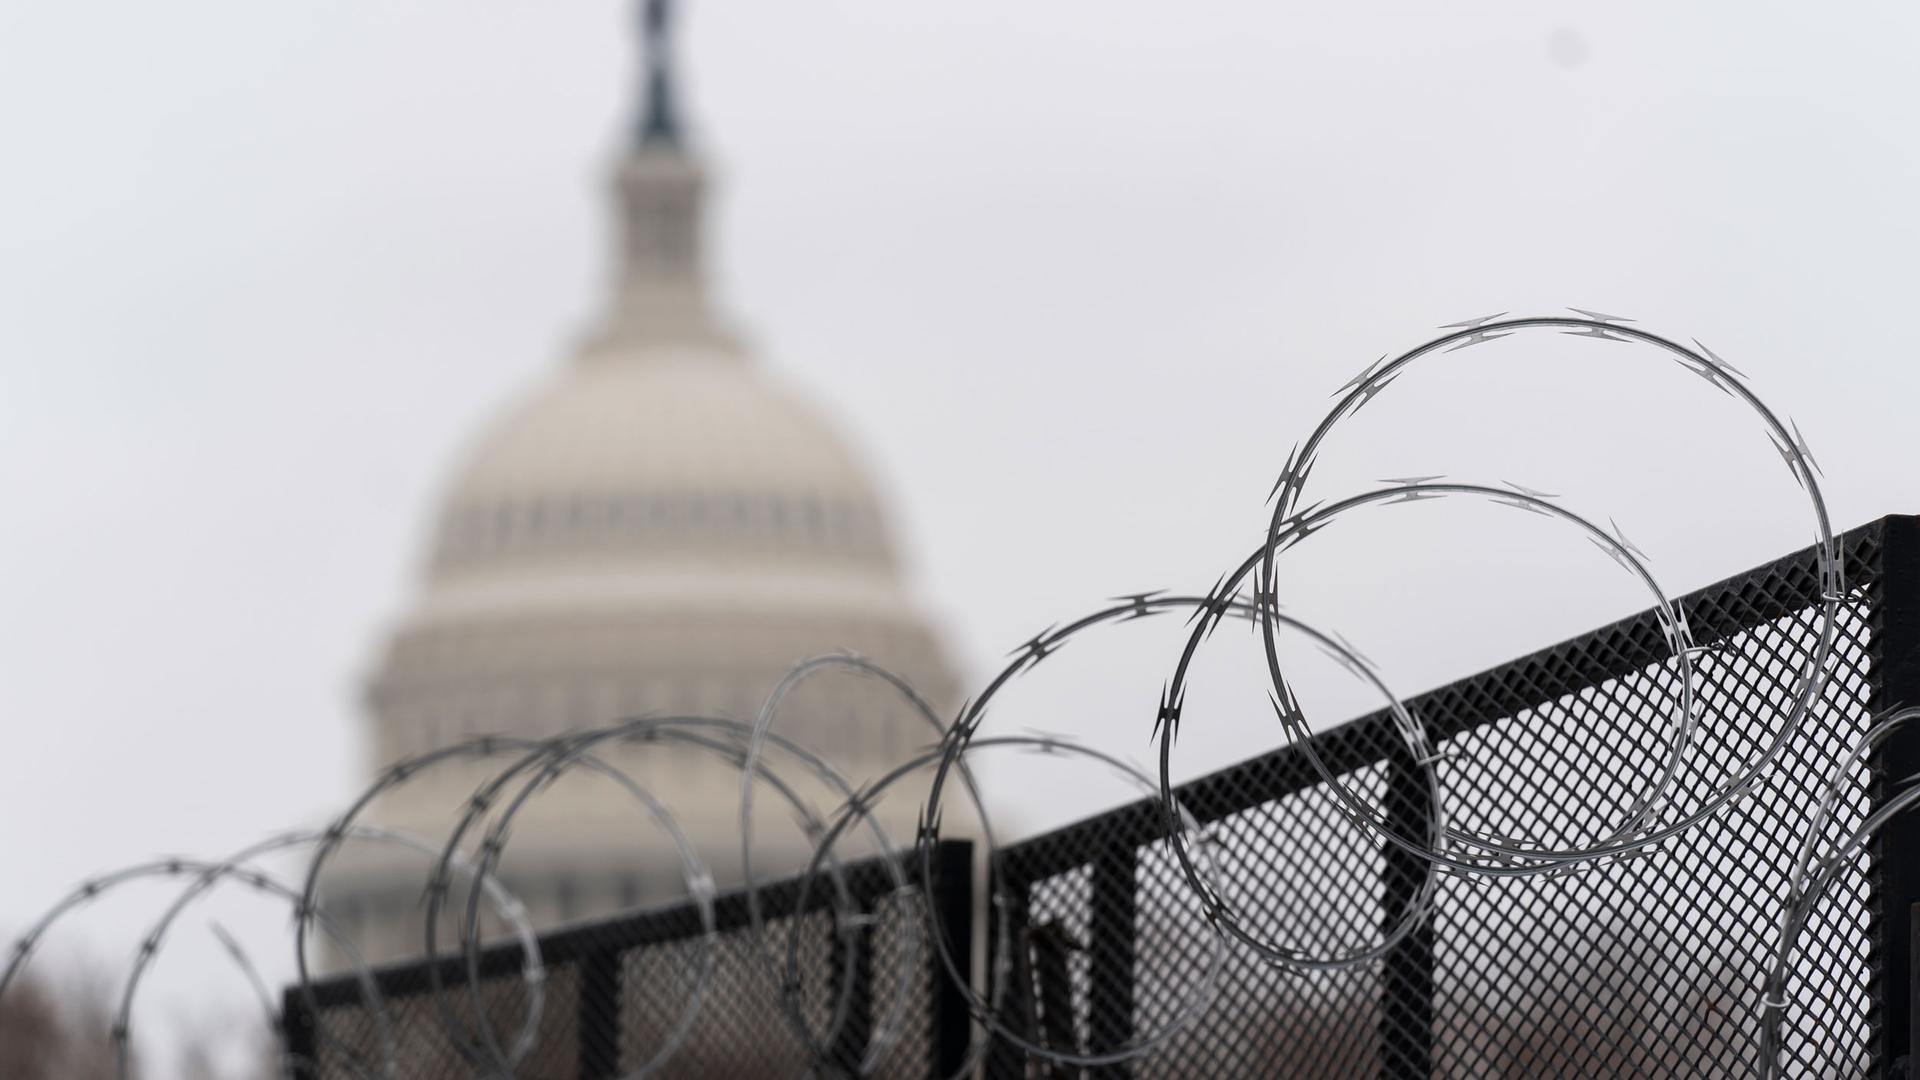 Circular razorwire is shown at the top of a fence with the dome of the US Capitol building in the distance and in soft focus.